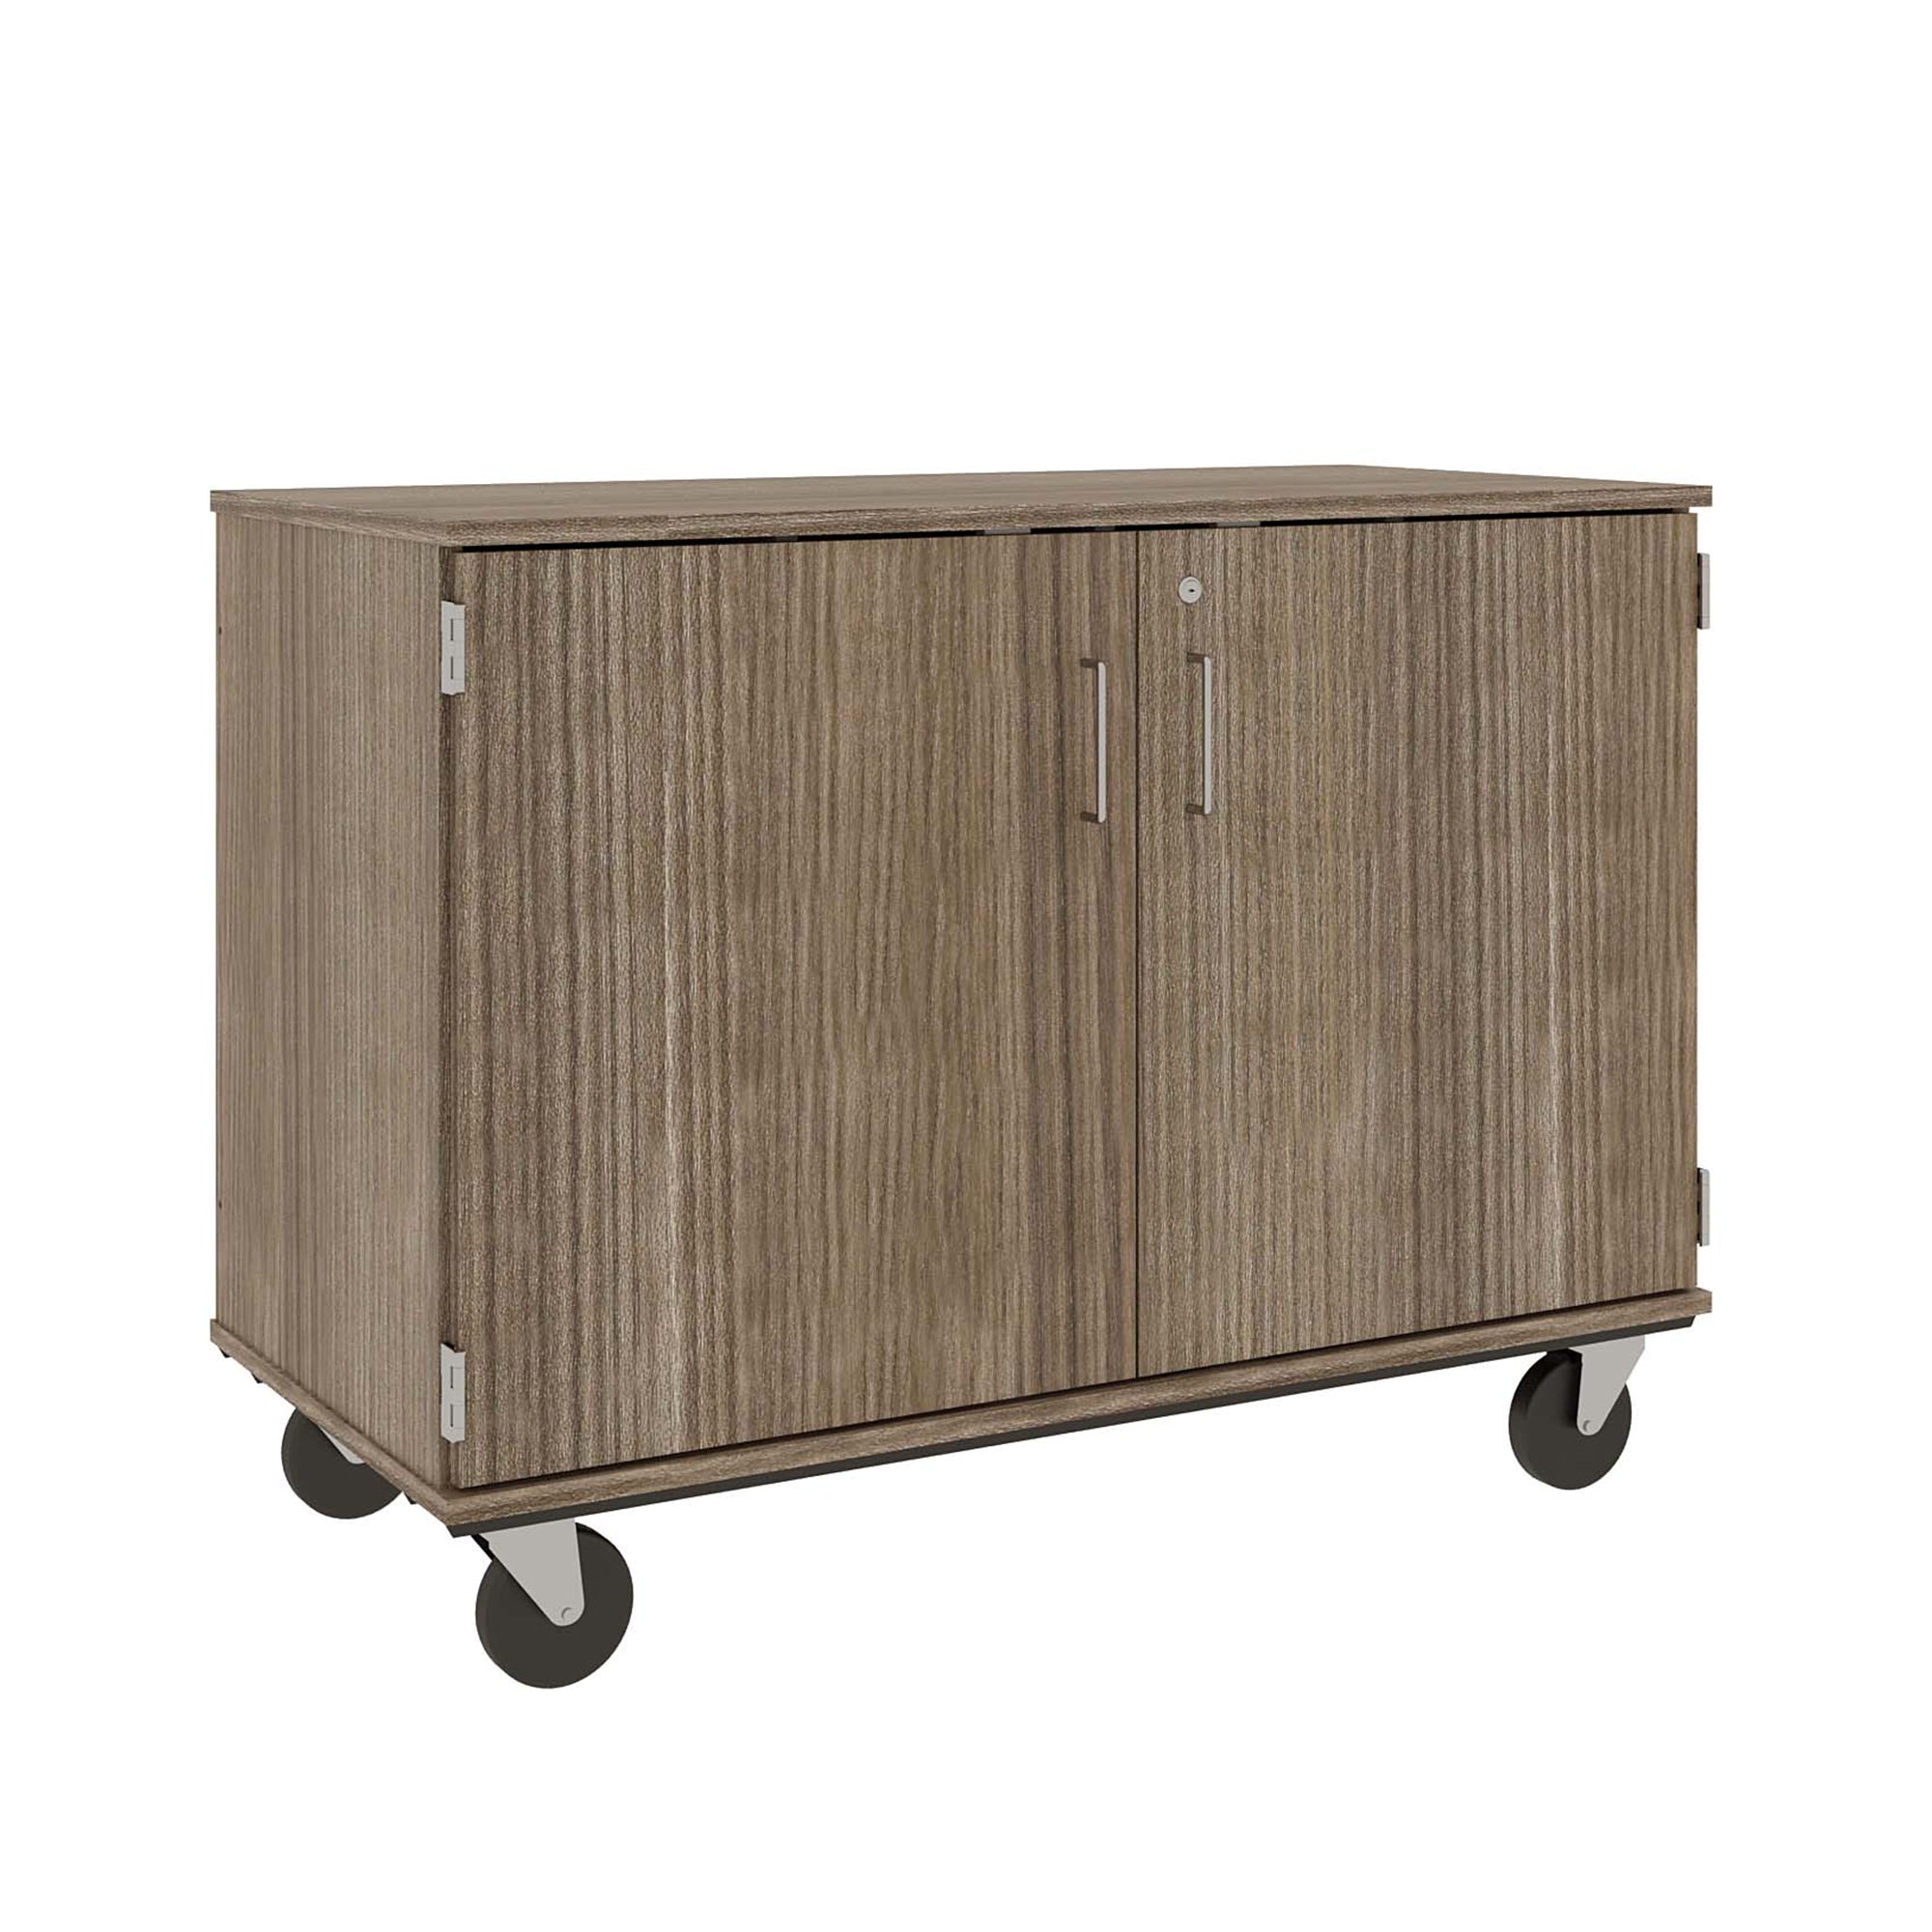 36" Assembled Mobile Cubbie Storage Cart with Locking Doors - 80240 F36